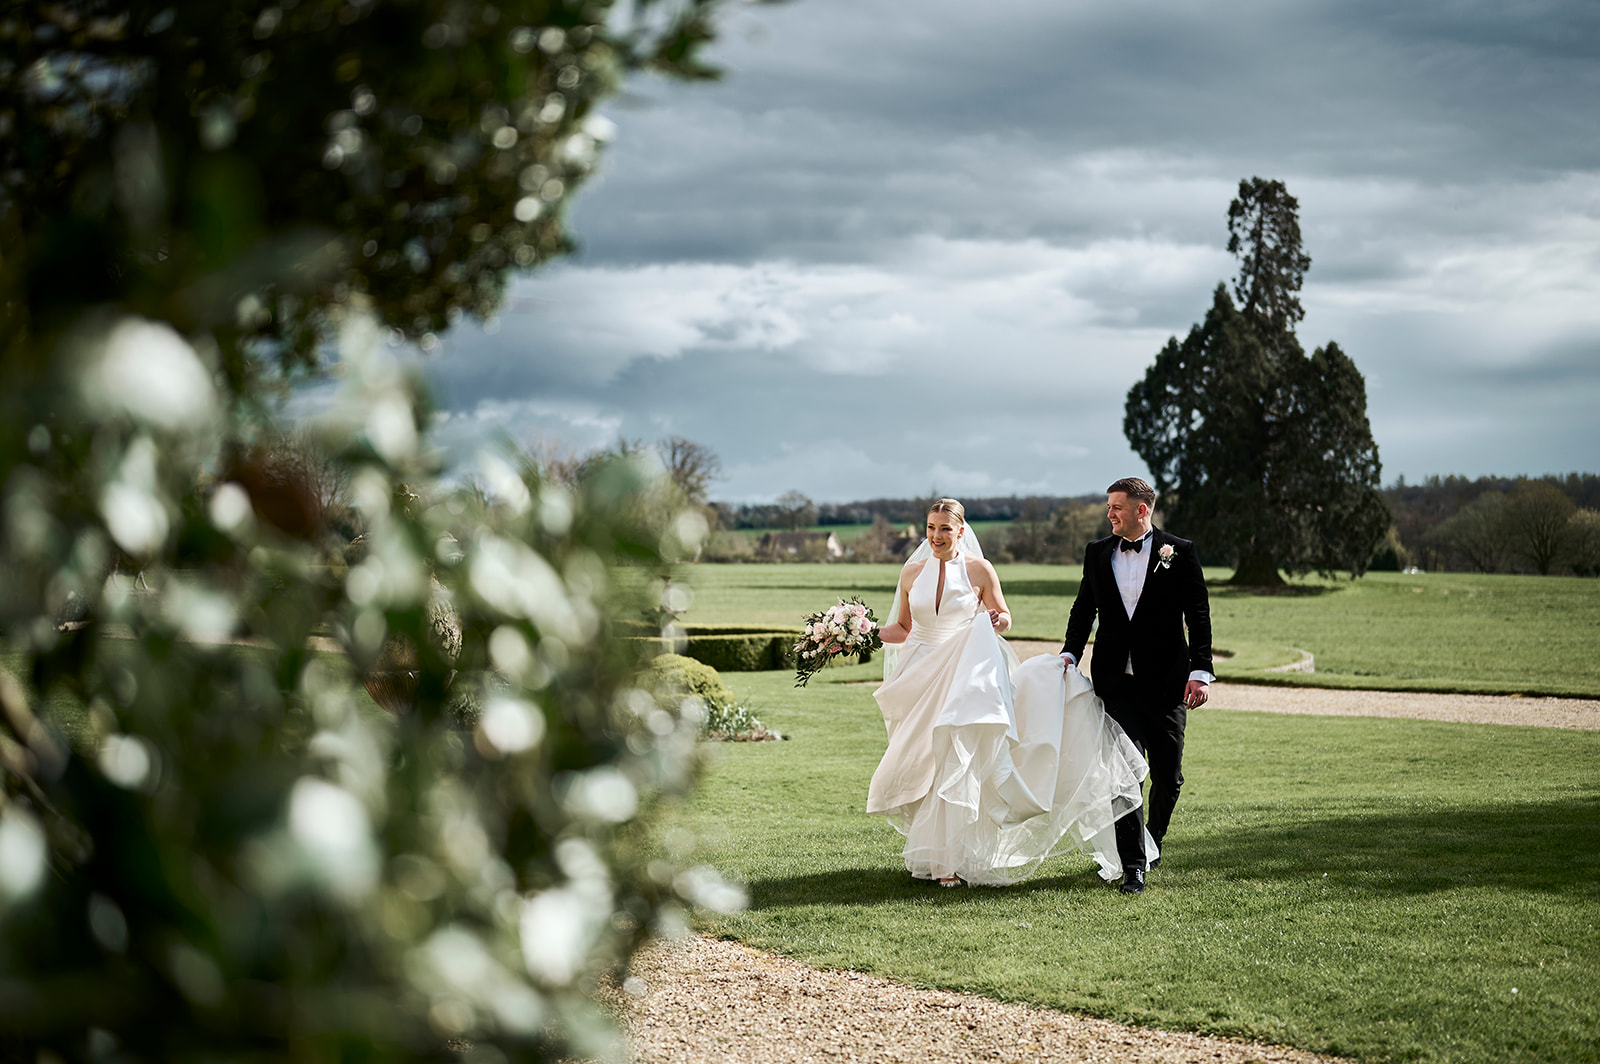 WEDDING DAY AT GOSFIELD HALL - RACHEL REEVE PHOTOGRAPHY